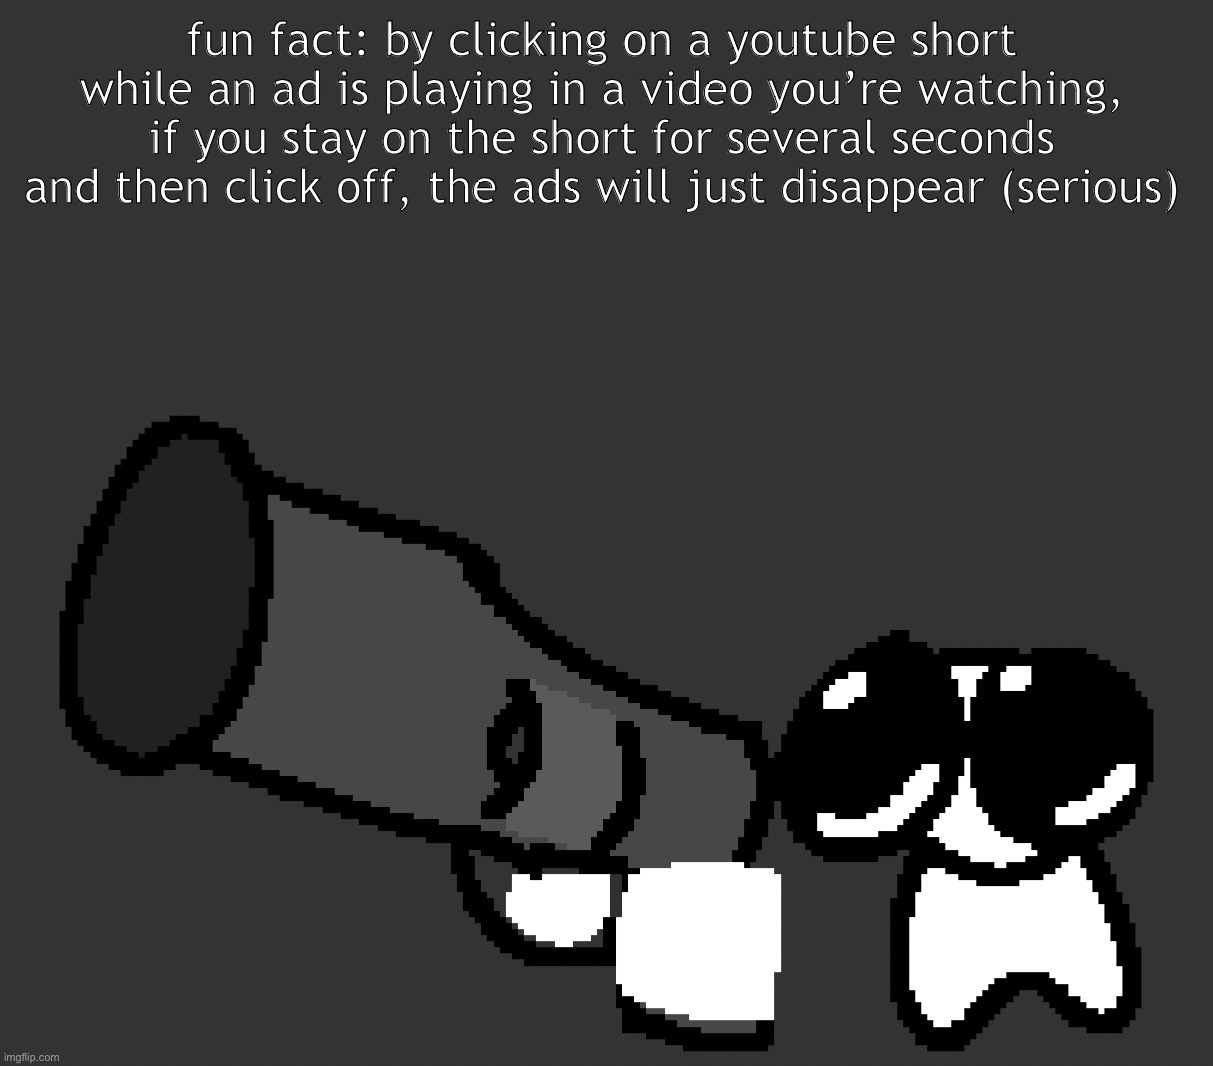 gremlin | fun fact: by clicking on a youtube short while an ad is playing in a video you’re watching, if you stay on the short for several seconds and then click off, the ads will just disappear (serious) | image tagged in gremlin | made w/ Imgflip meme maker